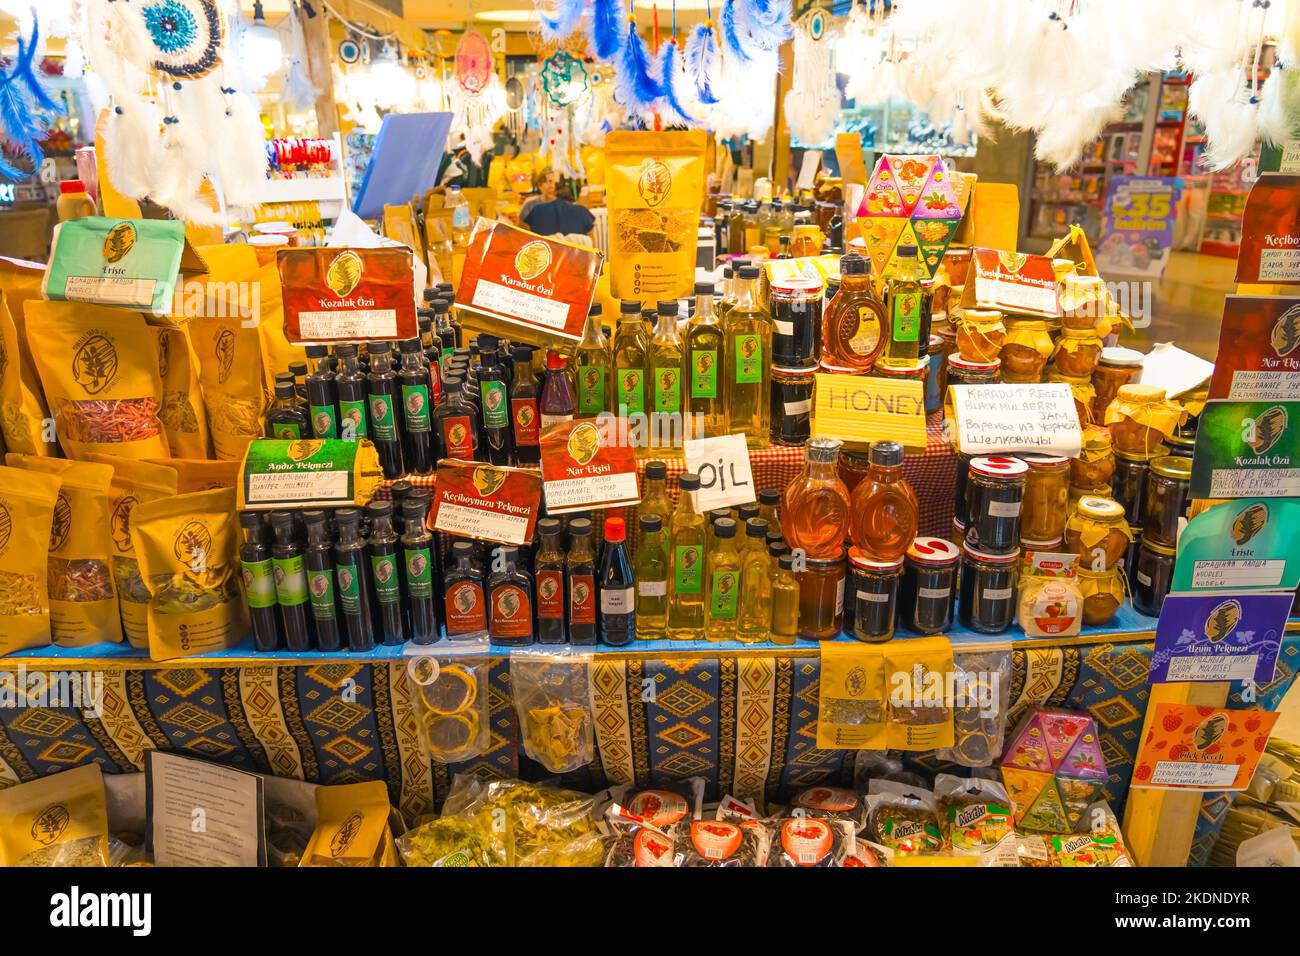 10.11.2022 - Side, Turkey - regional marketplace at shopping mall. counter full of oil bottles, honey and other different types of products. High quality photo Stock Photo